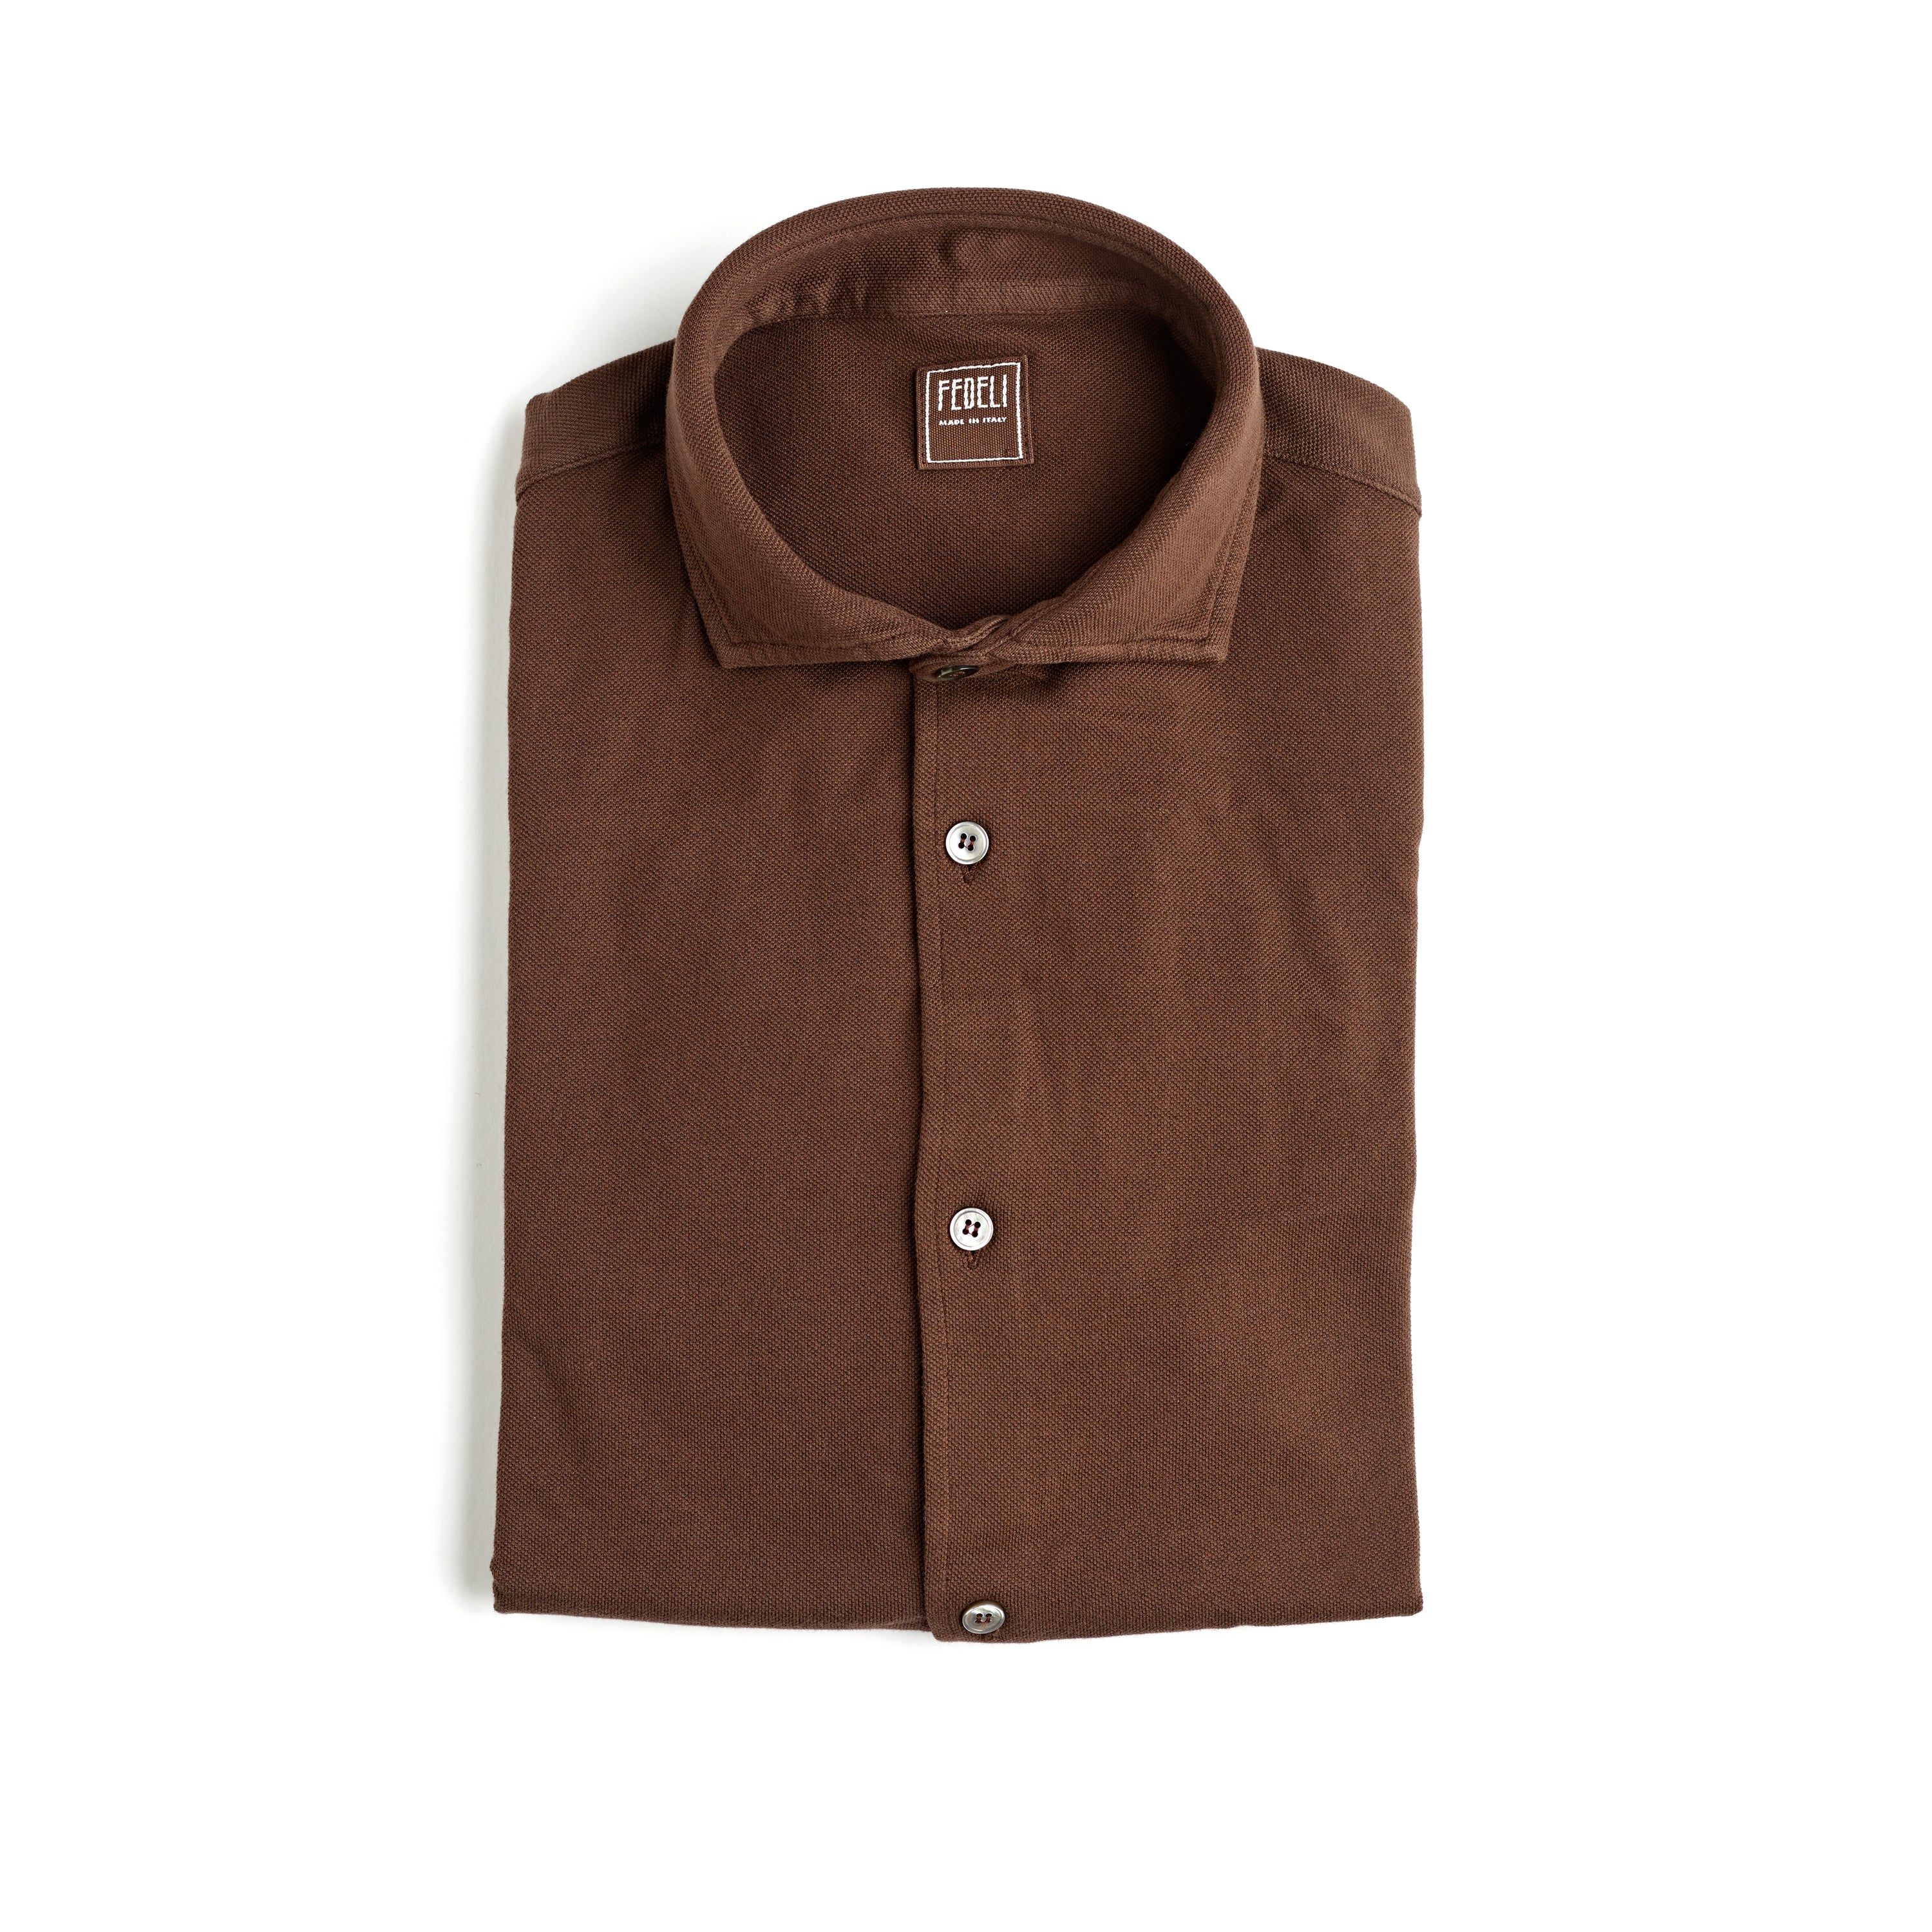 Fedeli Classic Long Sleeve Knitted Pique Polo Shirt Chocolate Brown